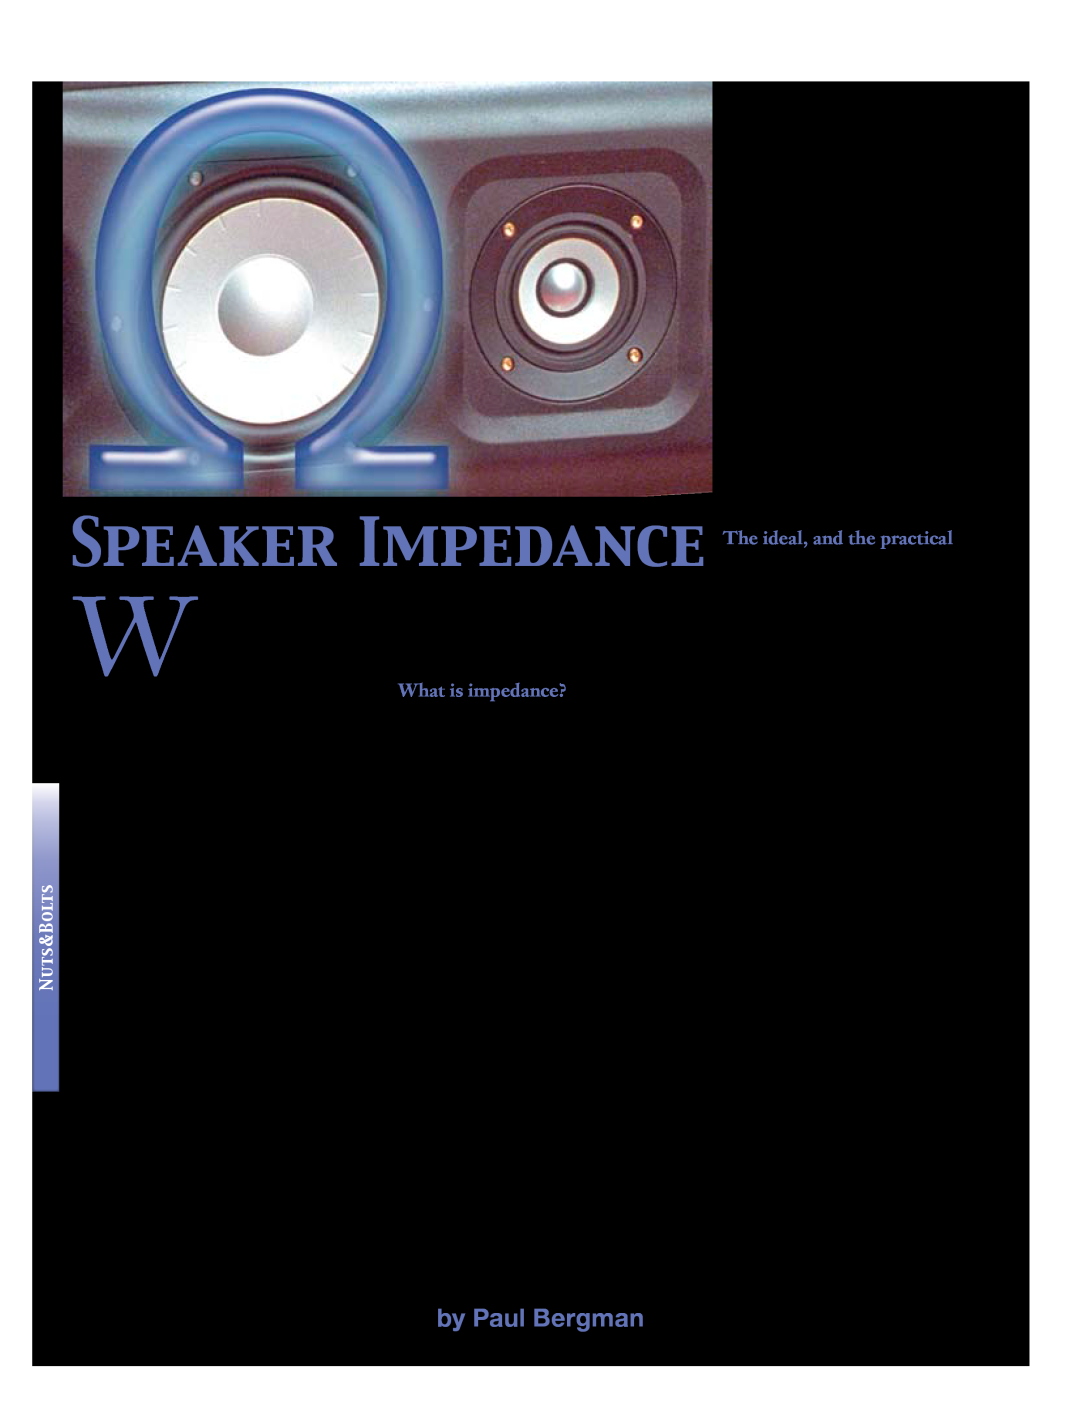 Koss 76 manual Speaker Impedance, by Paul Bergman, The ideal, and the practical, What is impedance? 